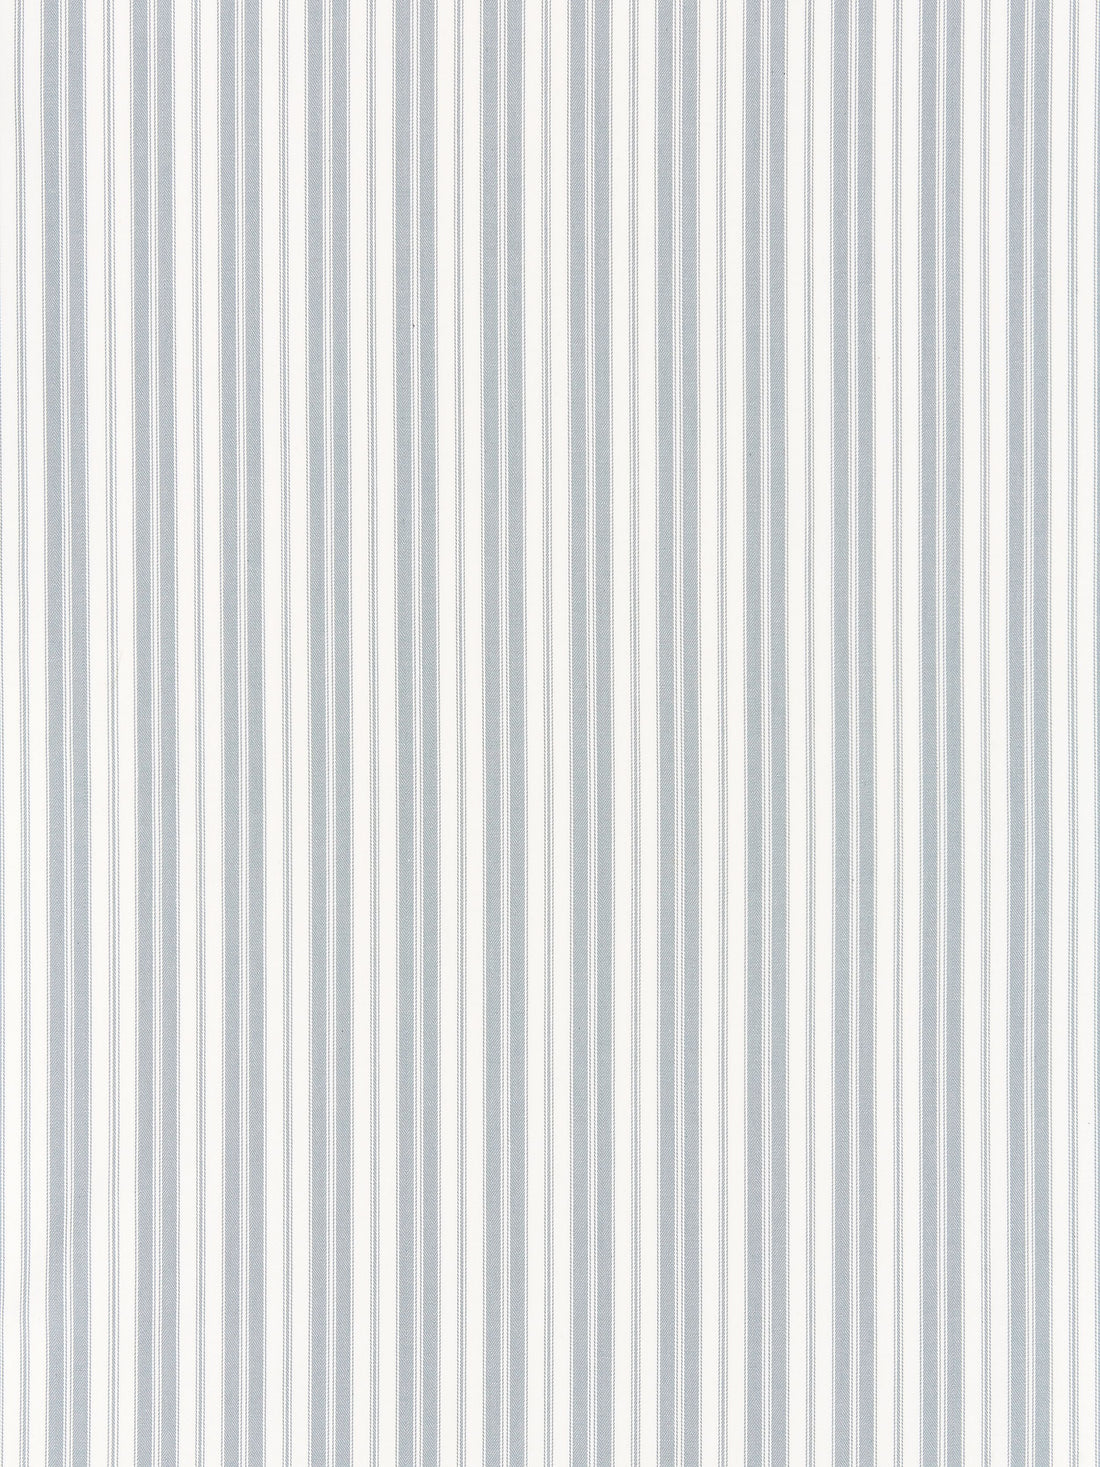 Devon Ticking Stripe fabric in mineral color - pattern number SC 000327115 - by Scalamandre in the Scalamandre Fabrics Book 1 collection